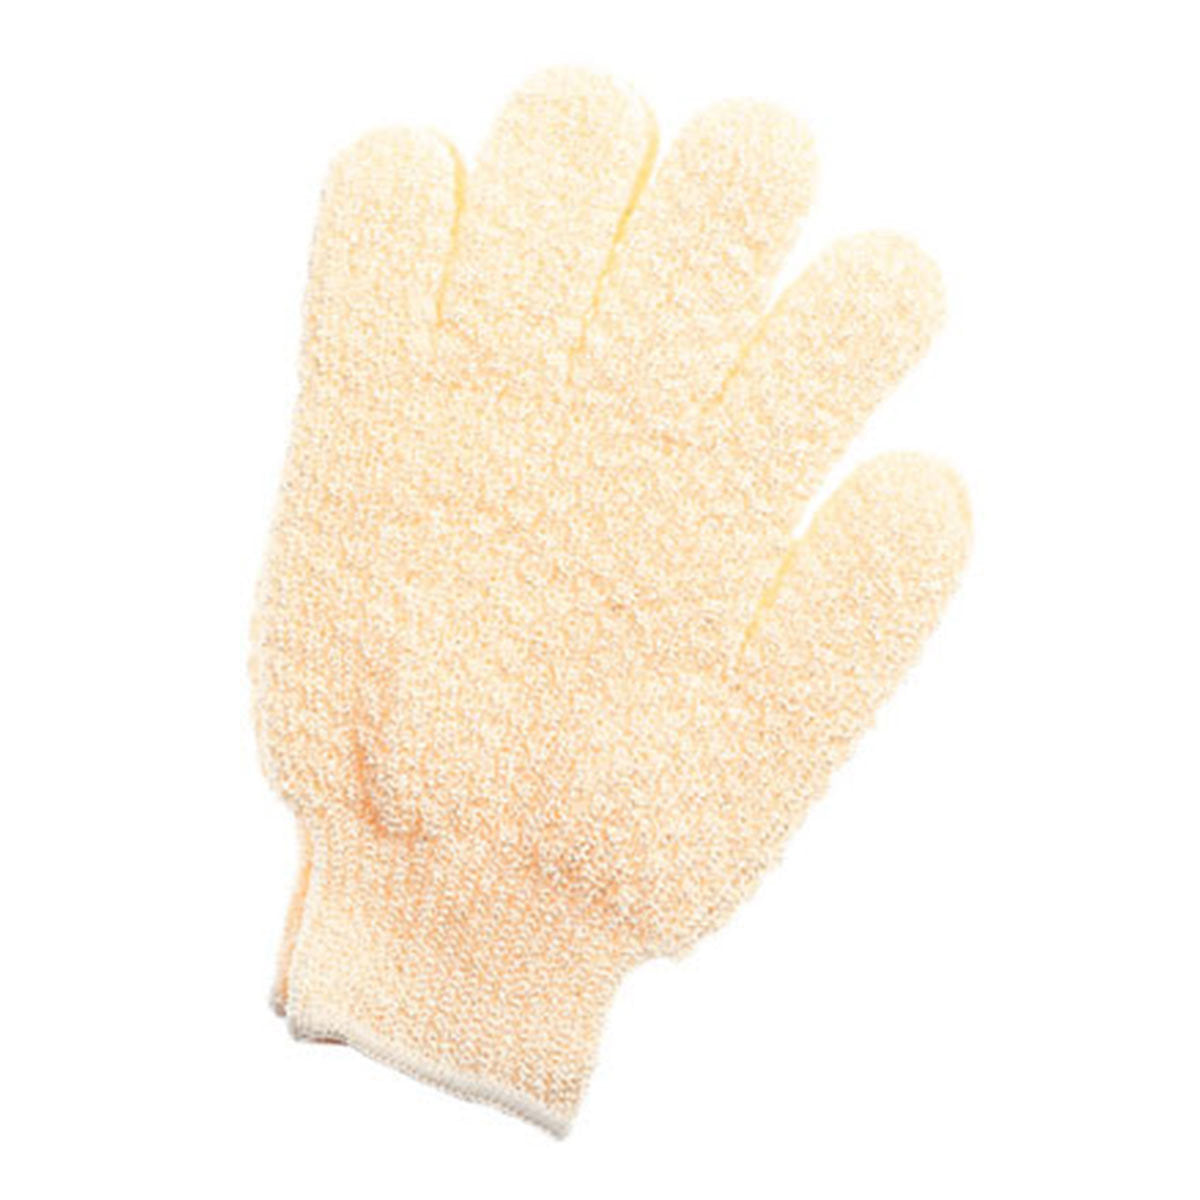 Primary image of Exfoliating Hydro Gloves - Natural